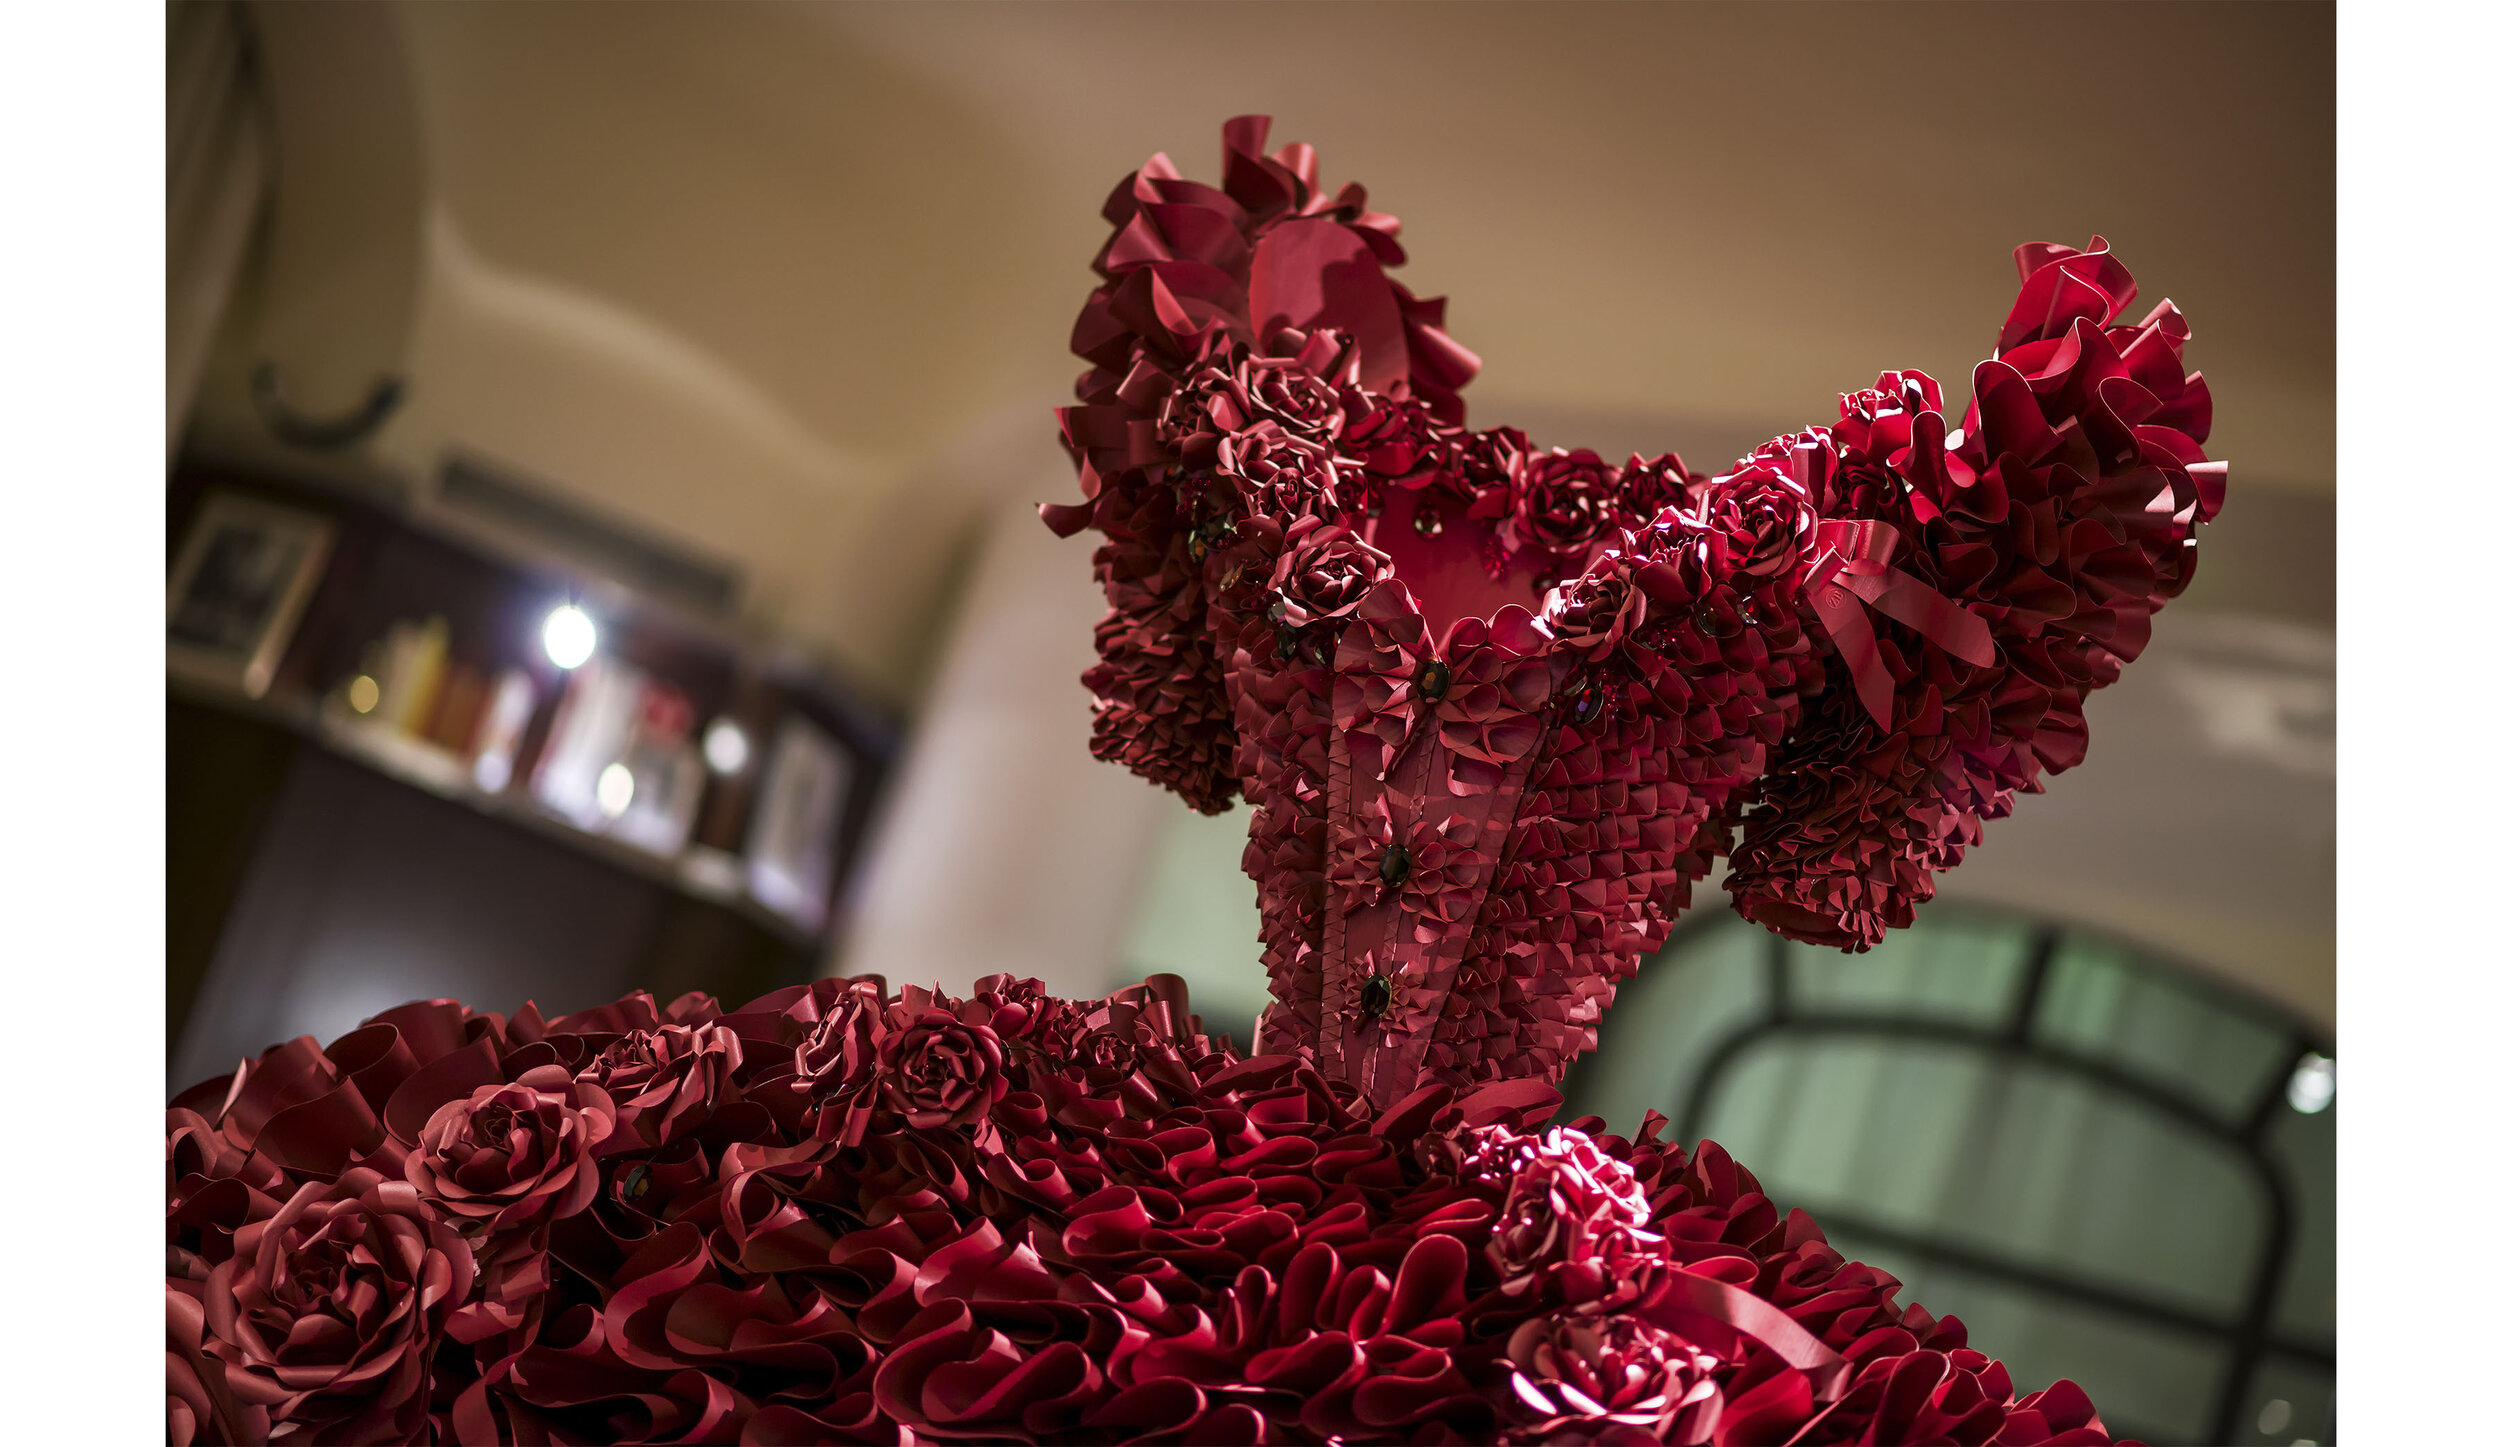 le-royal-monceau-zoebradley-couture-paperdress-red-roses-paperflowers-art-fashion-design.jpg